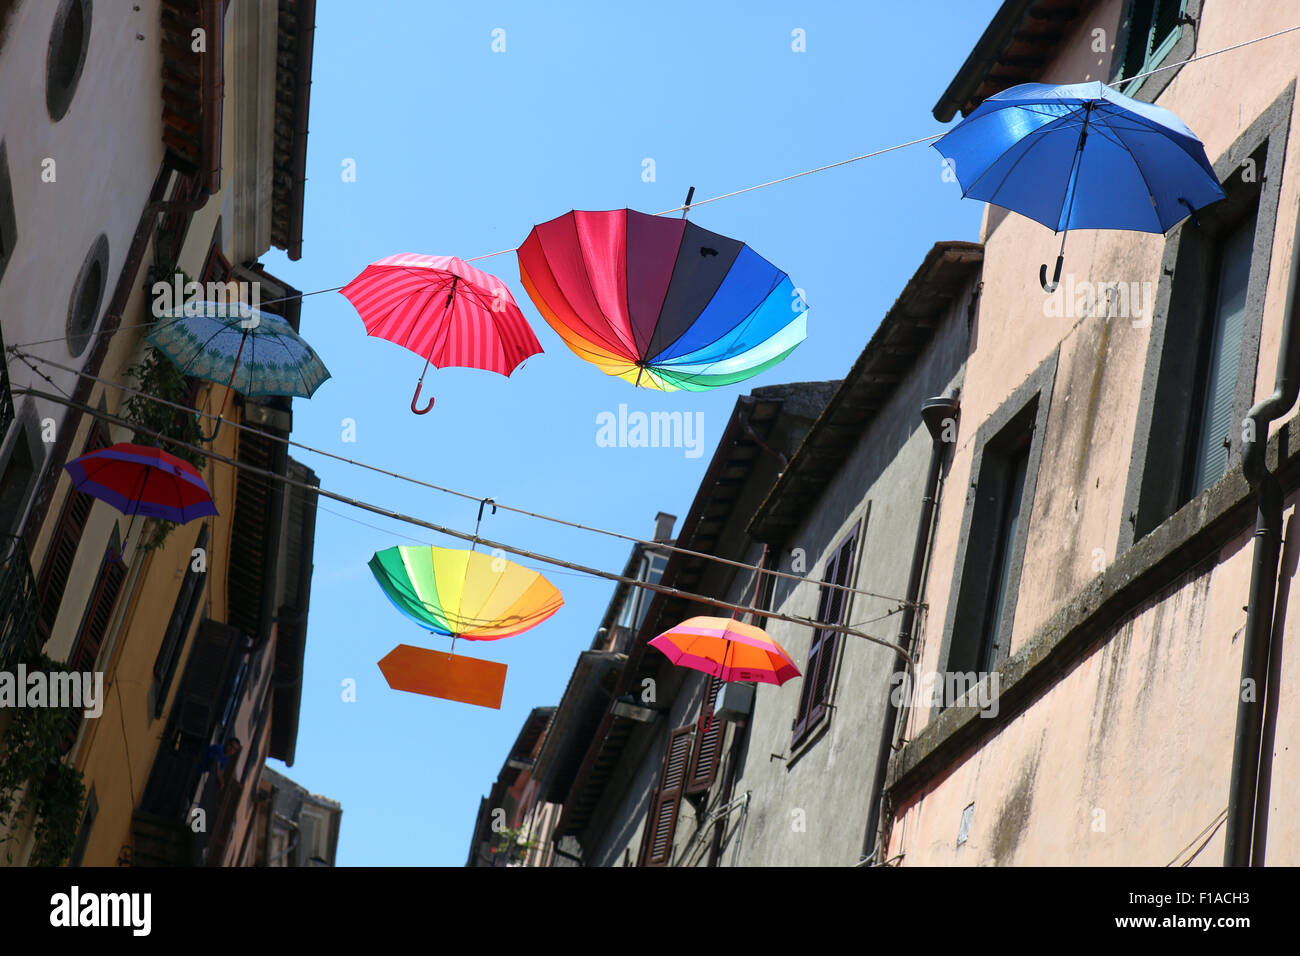 Bomarzo, Italy, umbrellas hanging in sunshine on a clothes line Stock Photo